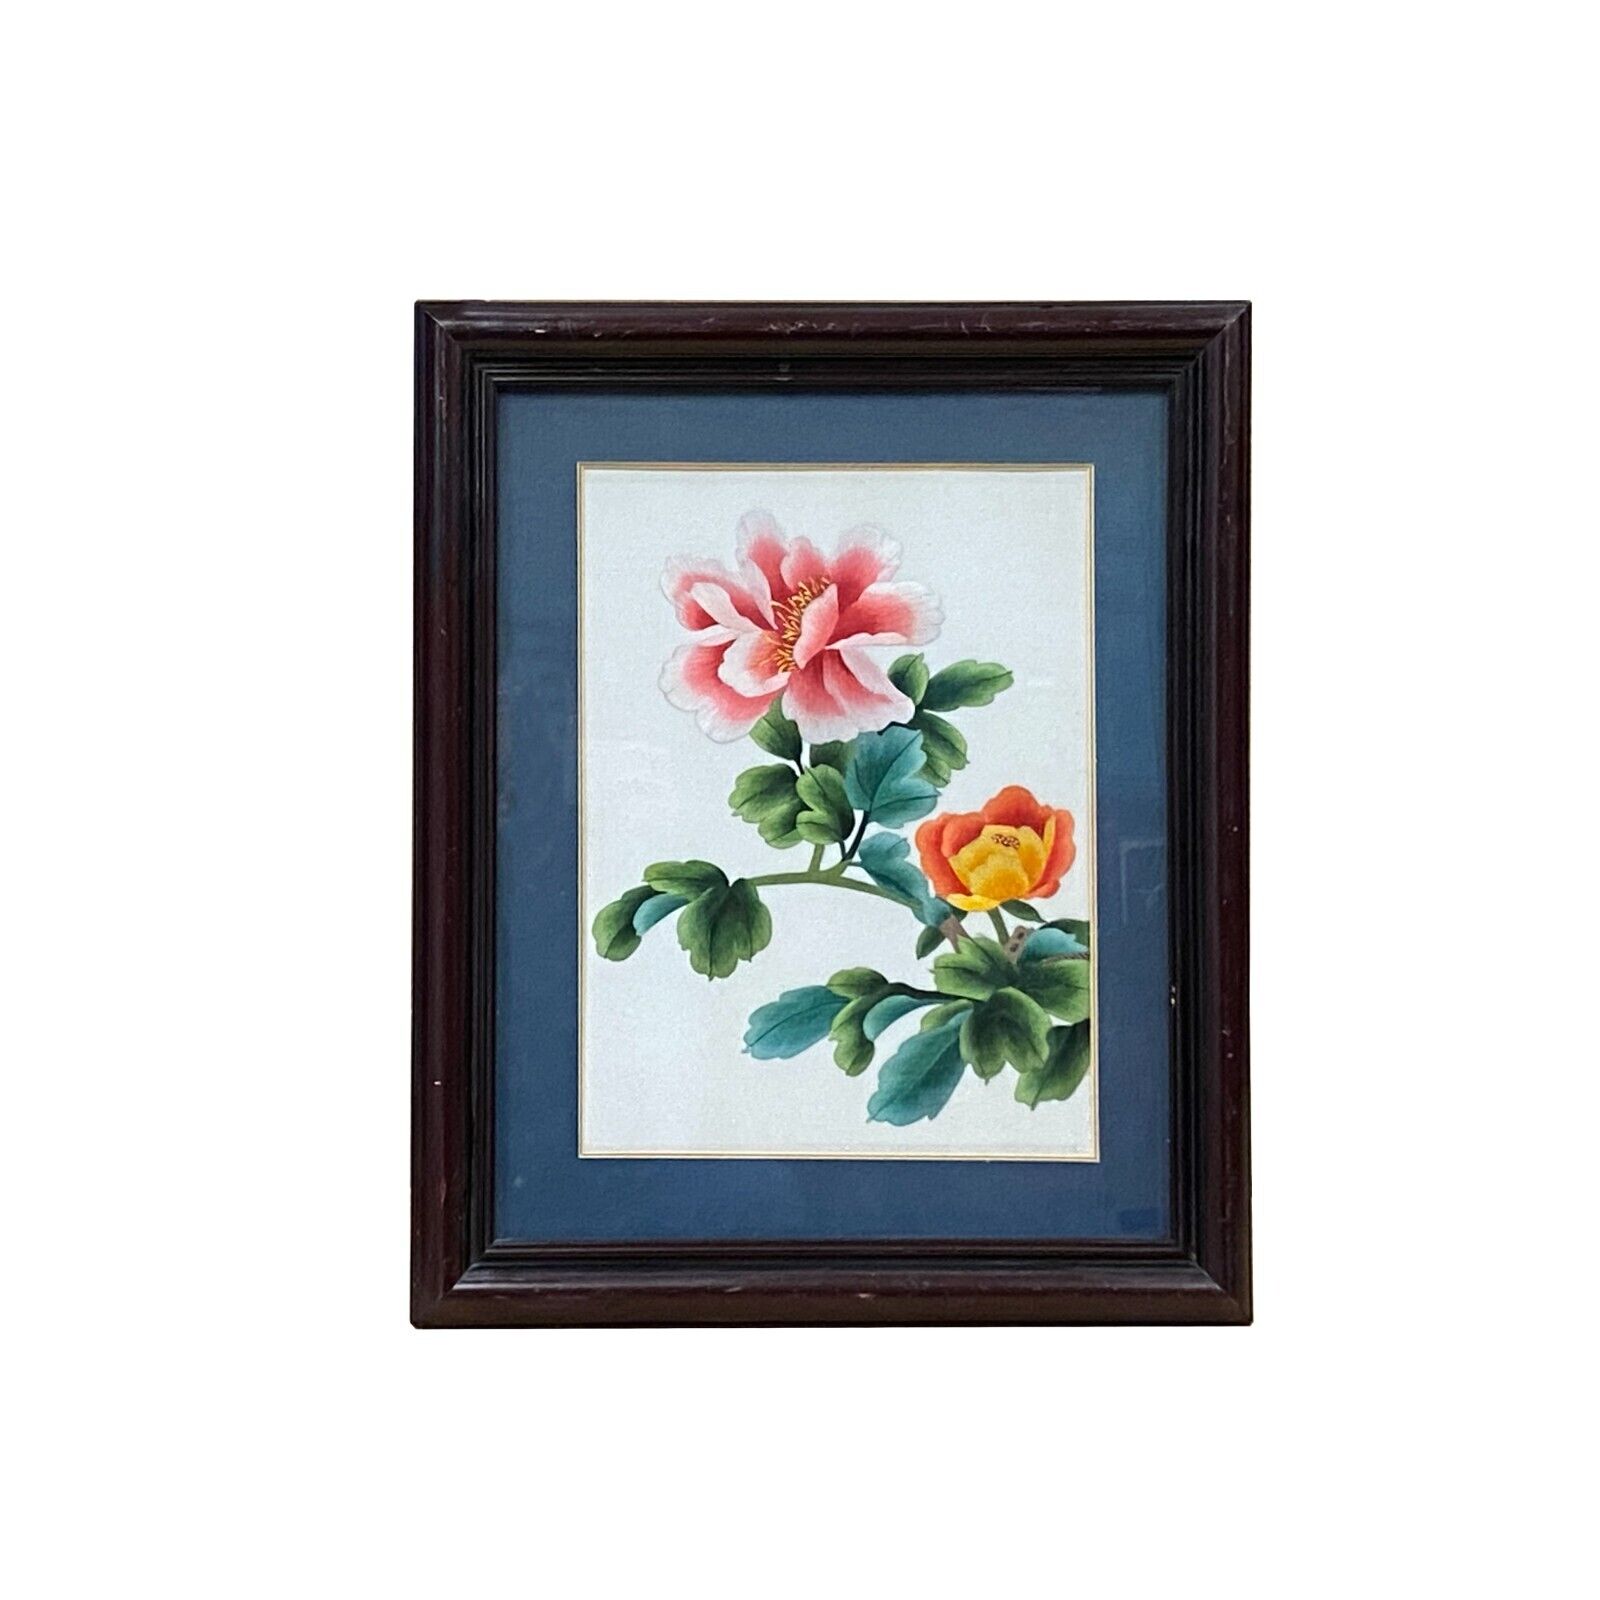 Oriental Chinese Peony Flower Embroidery Framed Wall Decor ws3437